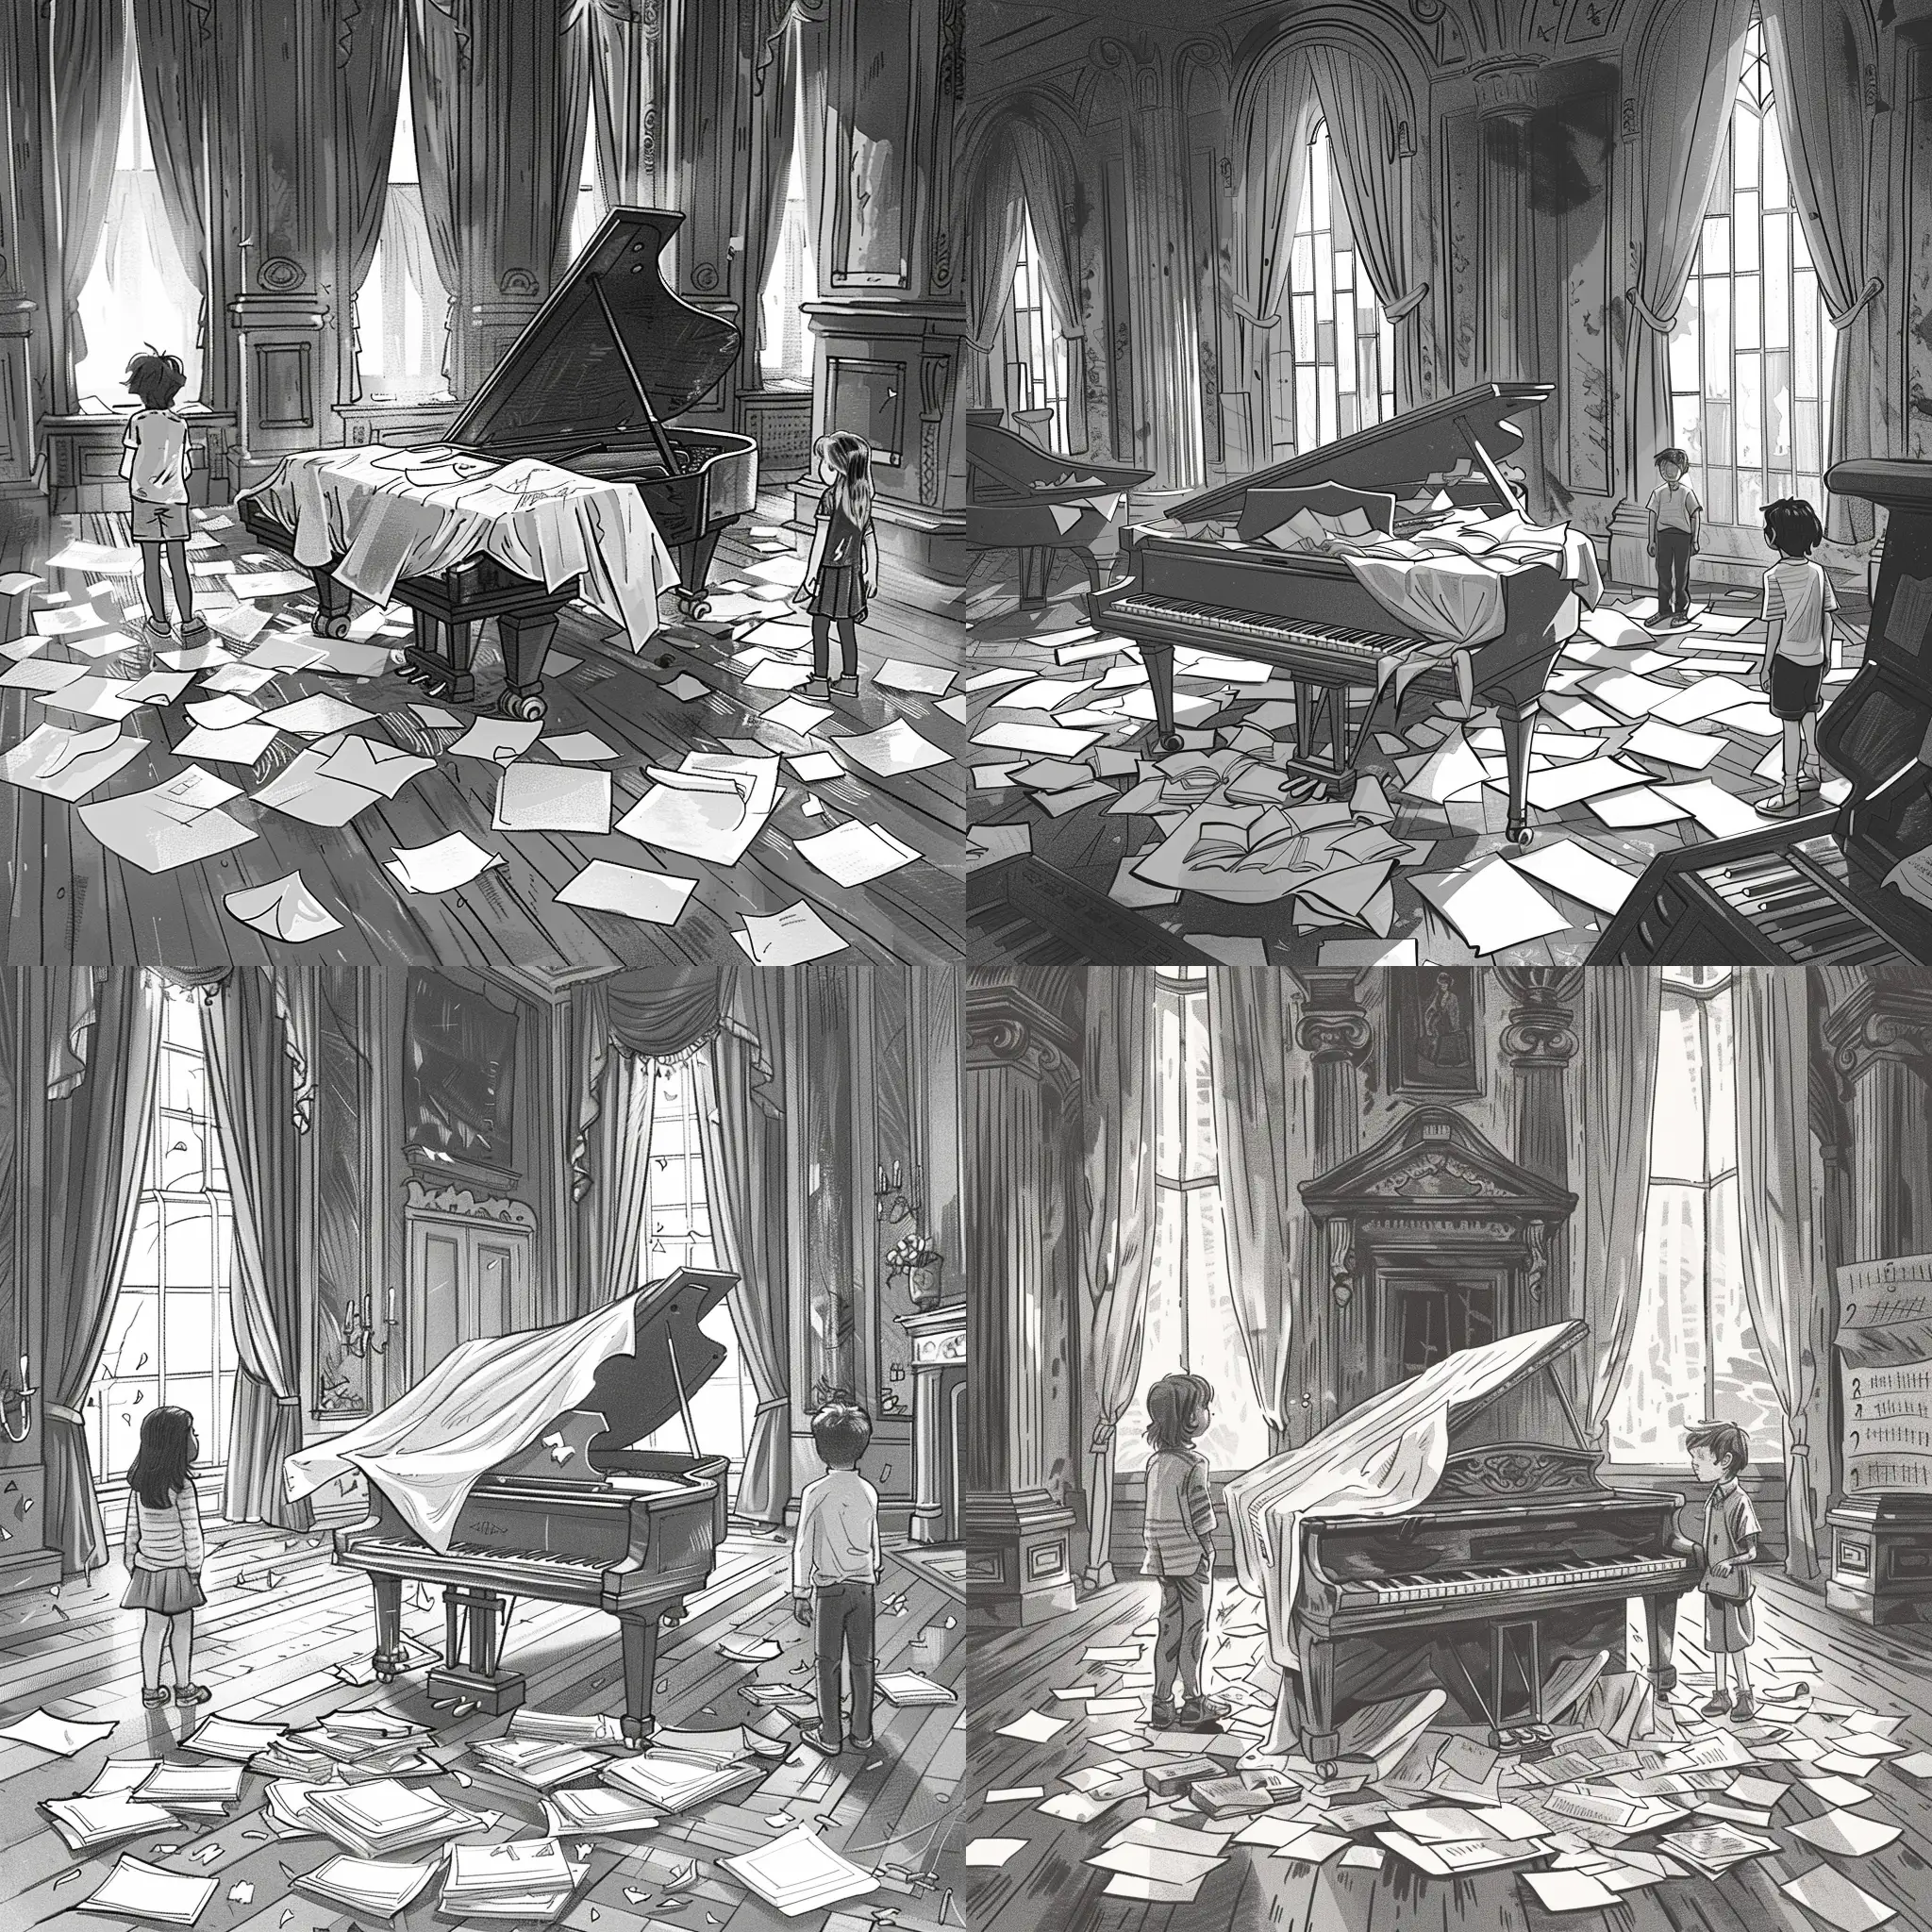 black and white childrens chapter book image of a large room in an old mansion, in the center of the room is ia a piano with a sheet covering some of the piano, on the piano and scattered on the floor are lots of sheets of paper, in the background there are a couple of large tall windows with curtains, also in the room are two 10 year ols children stood looking around the room.